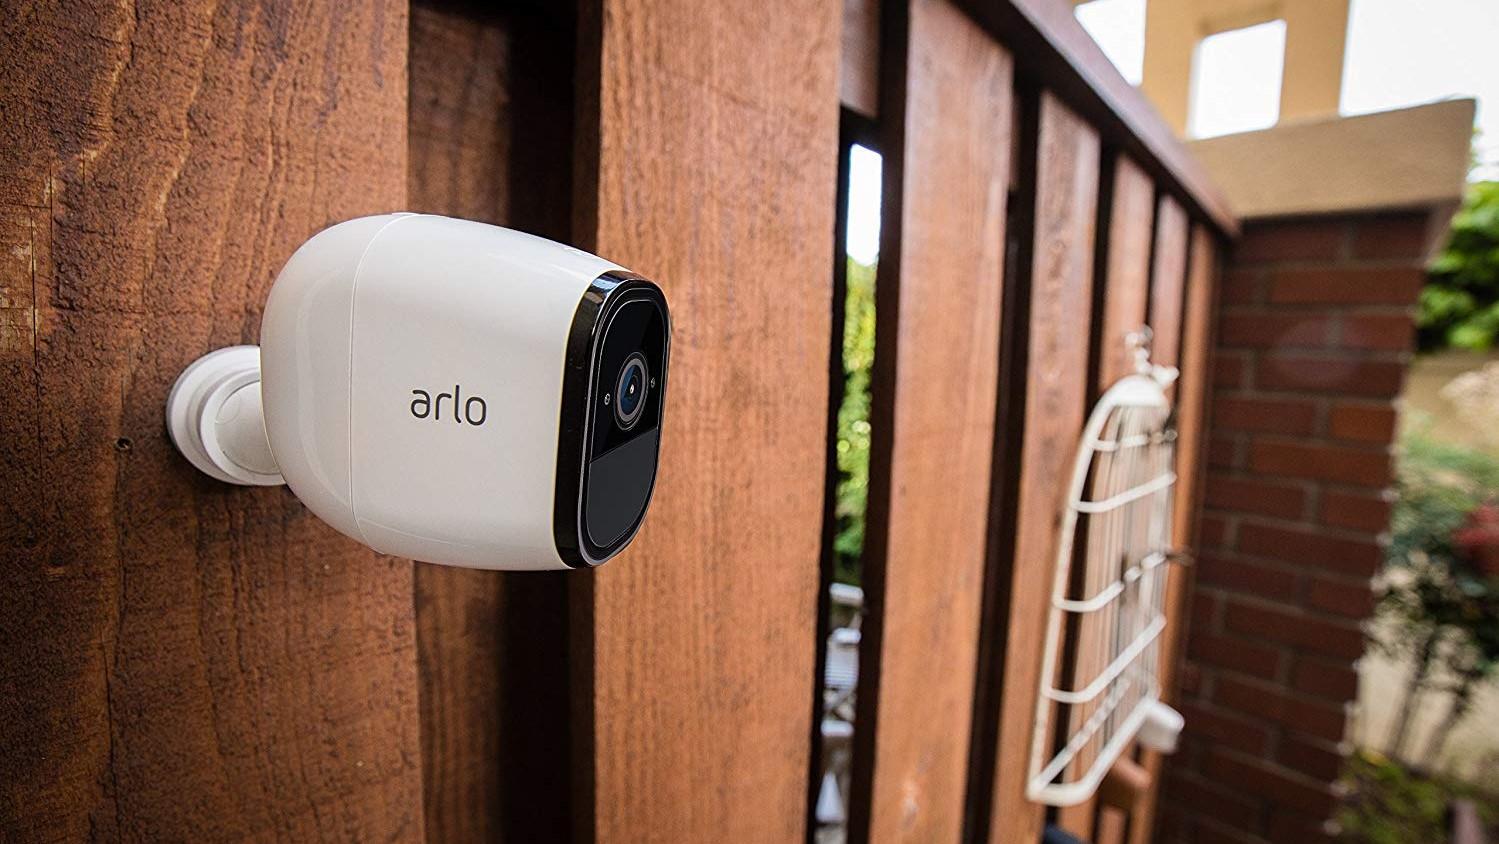 The Arlo Pro wall-mounted security camera.